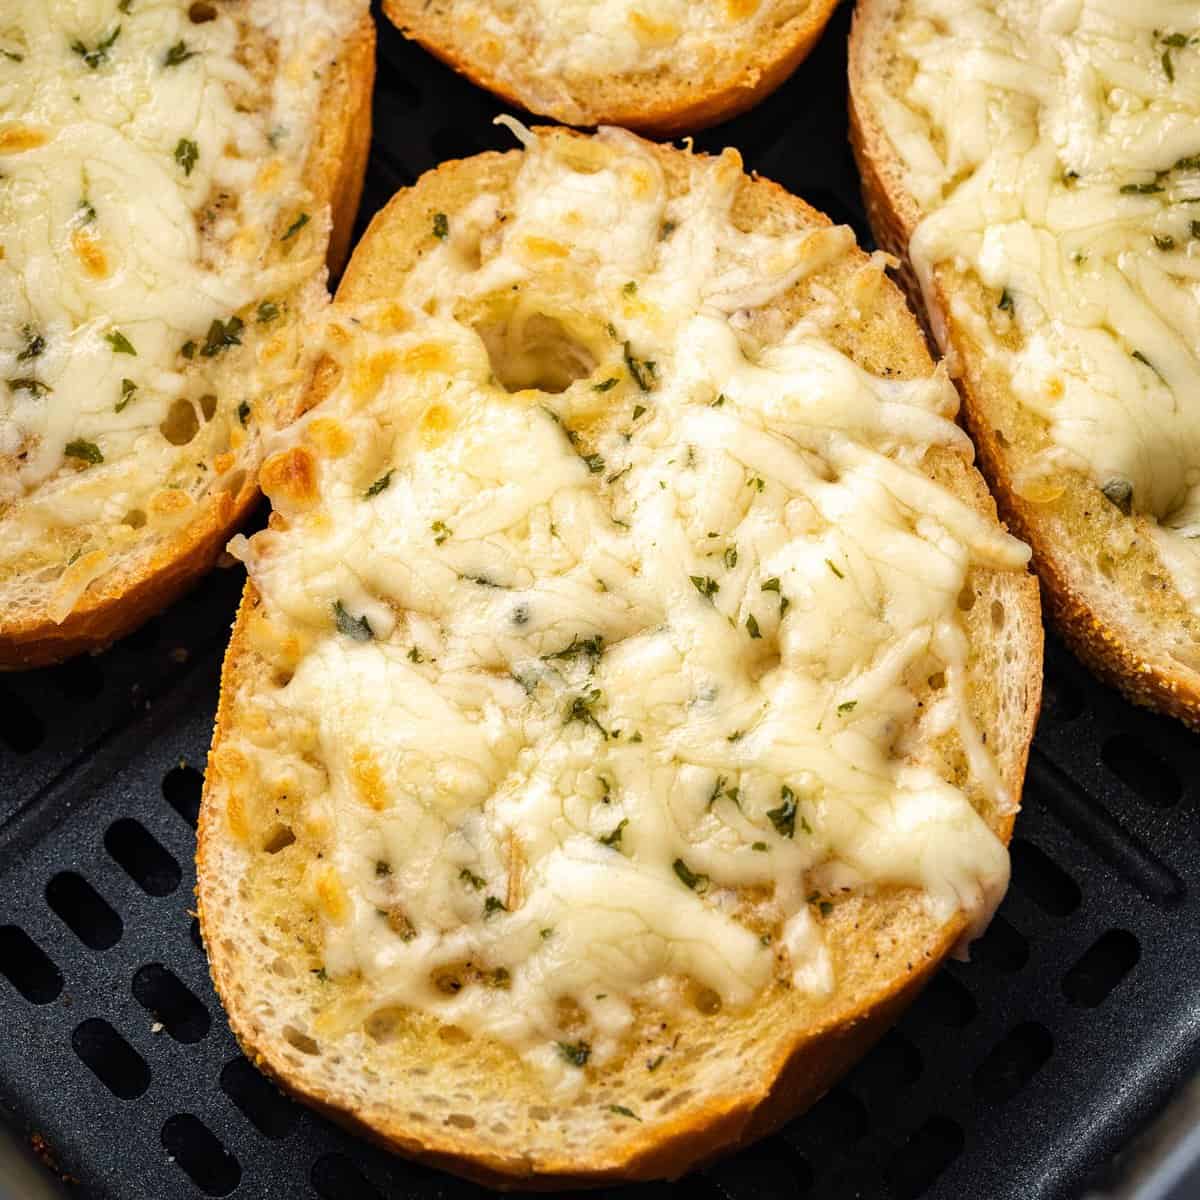 A close up looking at a piece of cheesy garlic bread.